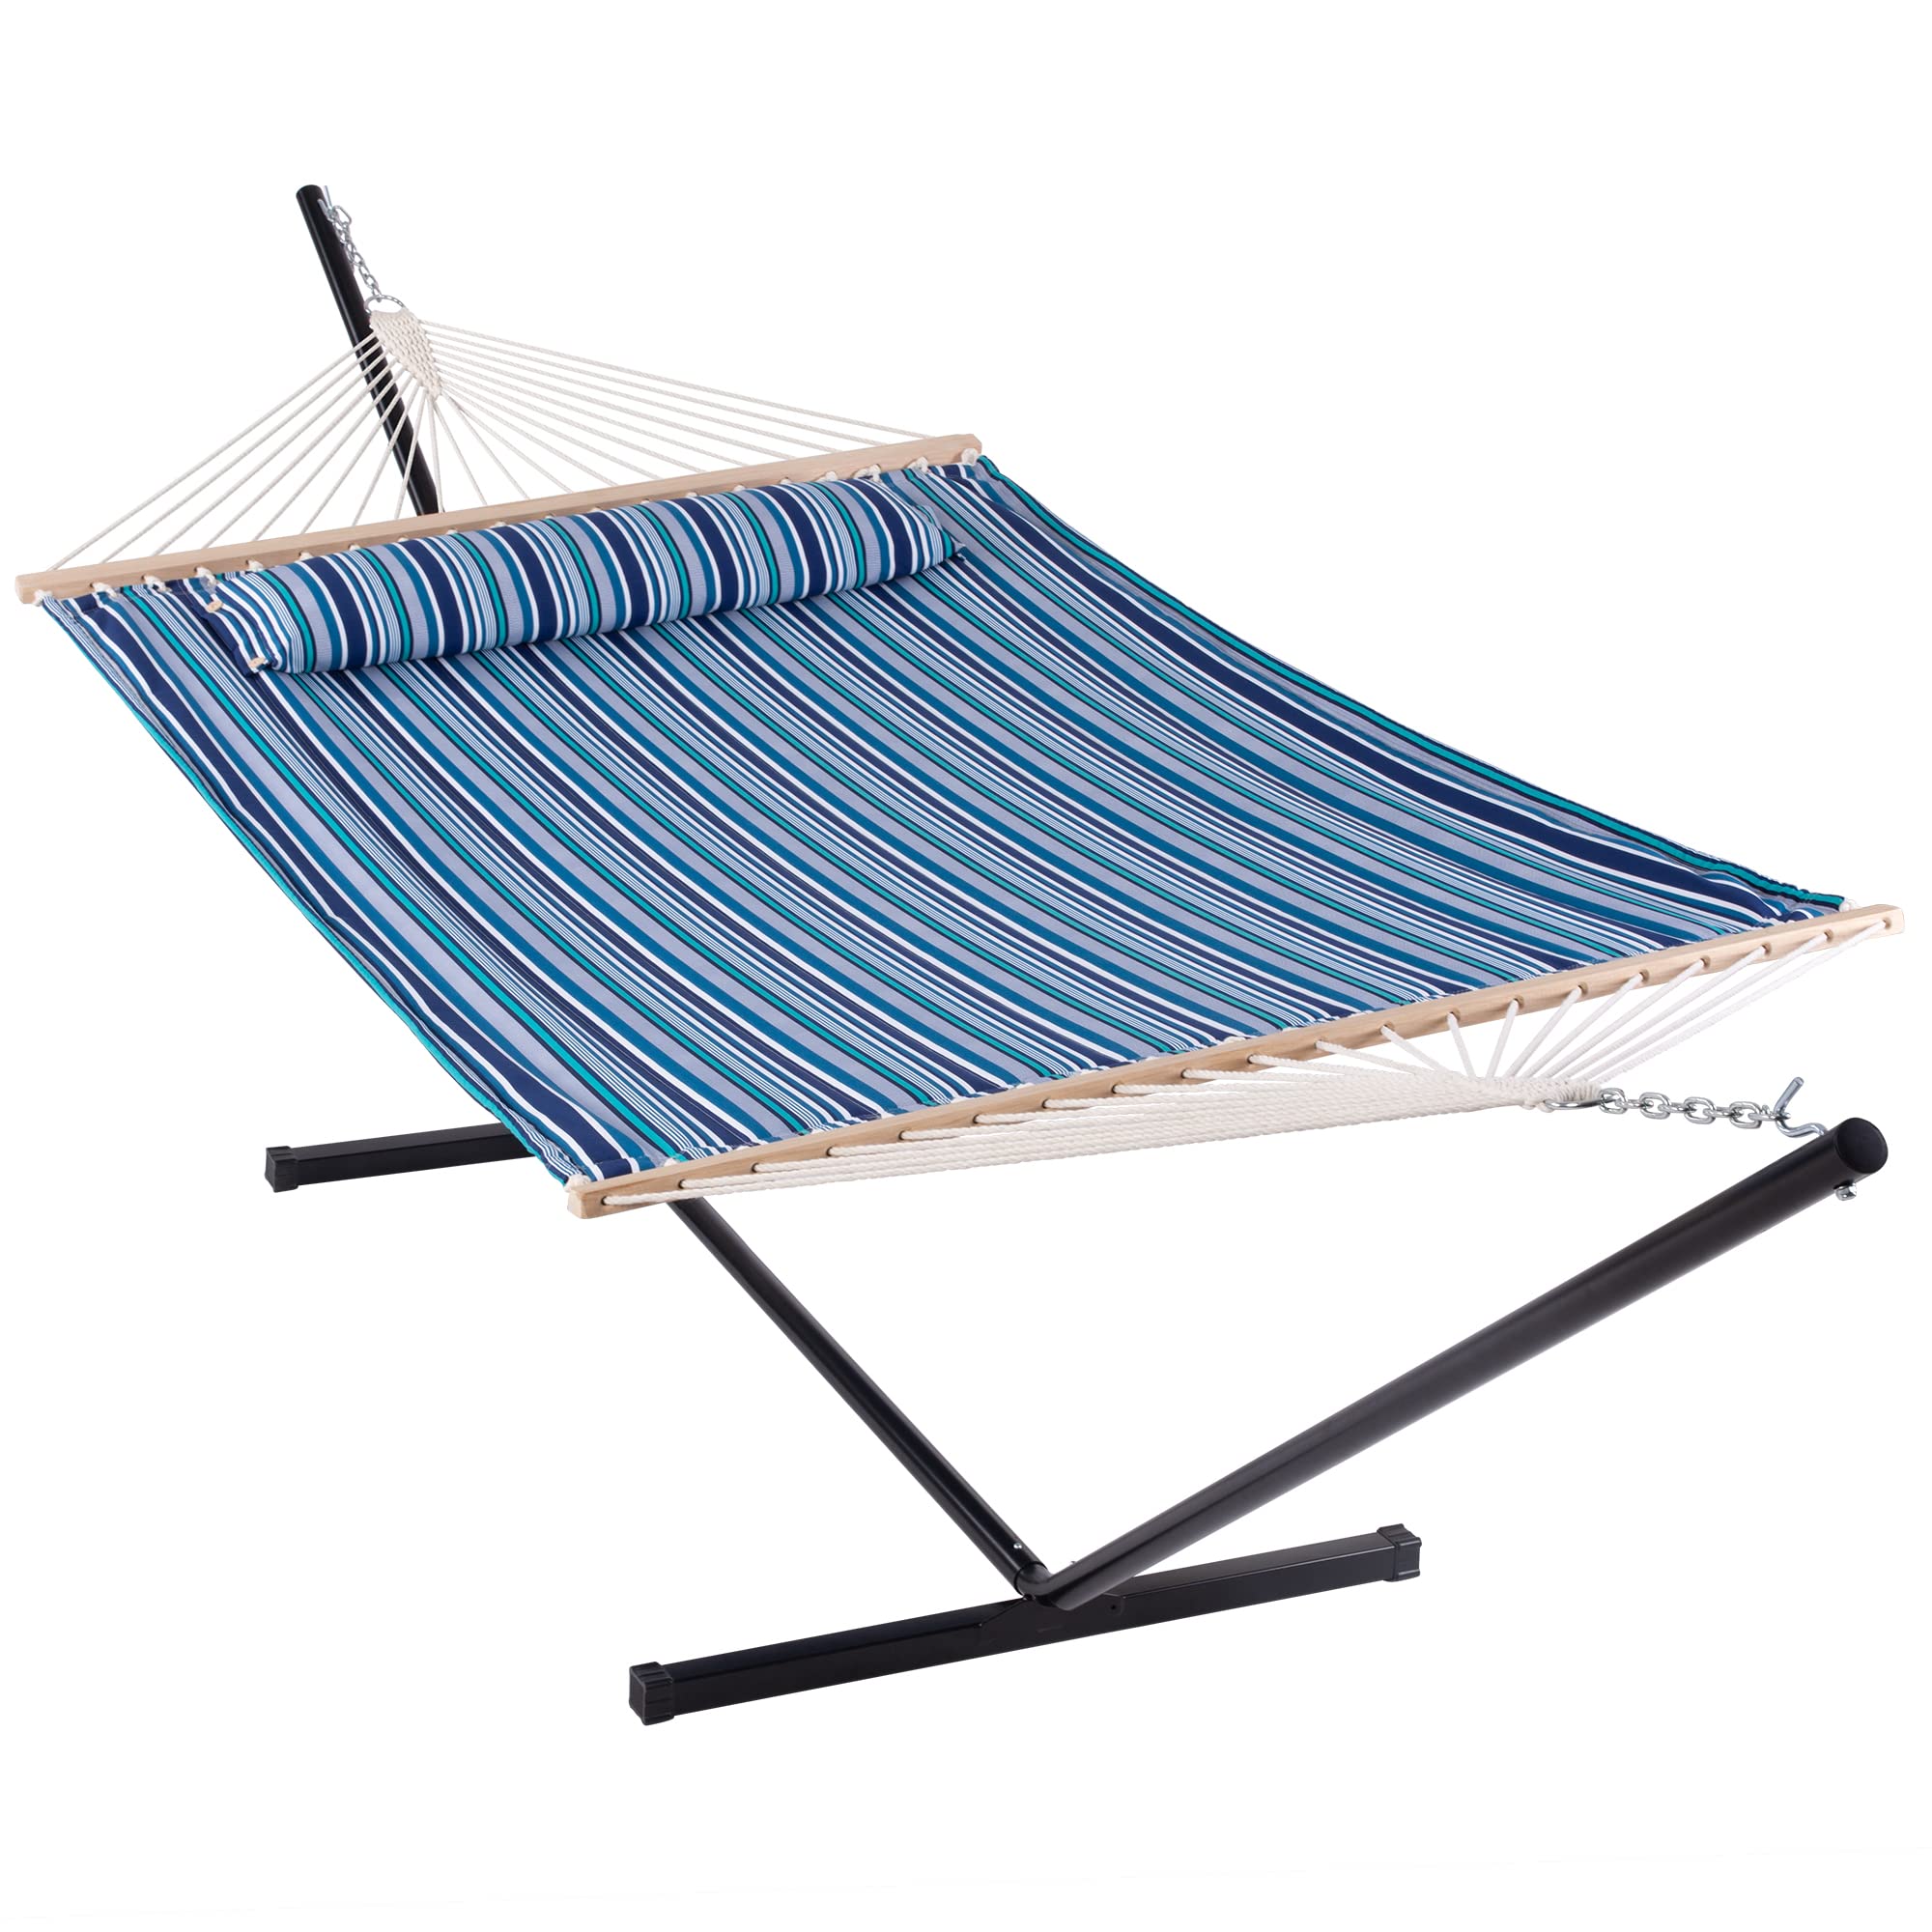 ANOW Double Hammock with Stand 12FT Heavy Duty Hammock with Stand for Outdoors Indoors 450 LBS Weight Capacity Blue Stripe